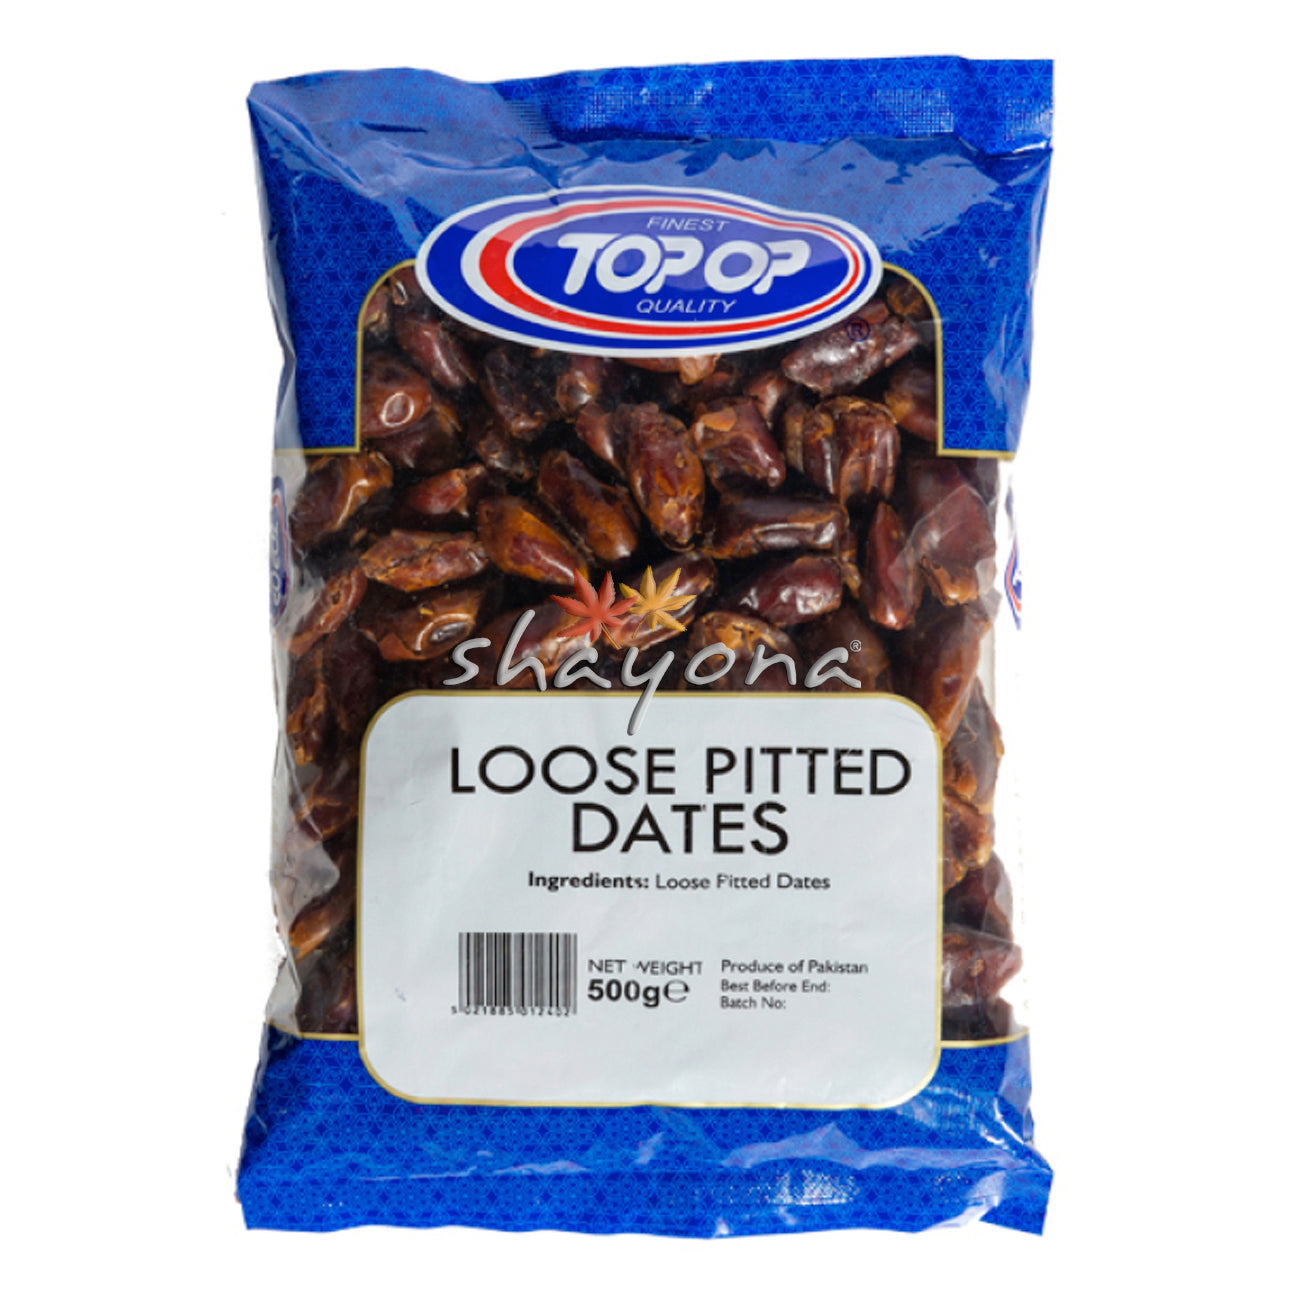 TopOp Loose Pitted Dates